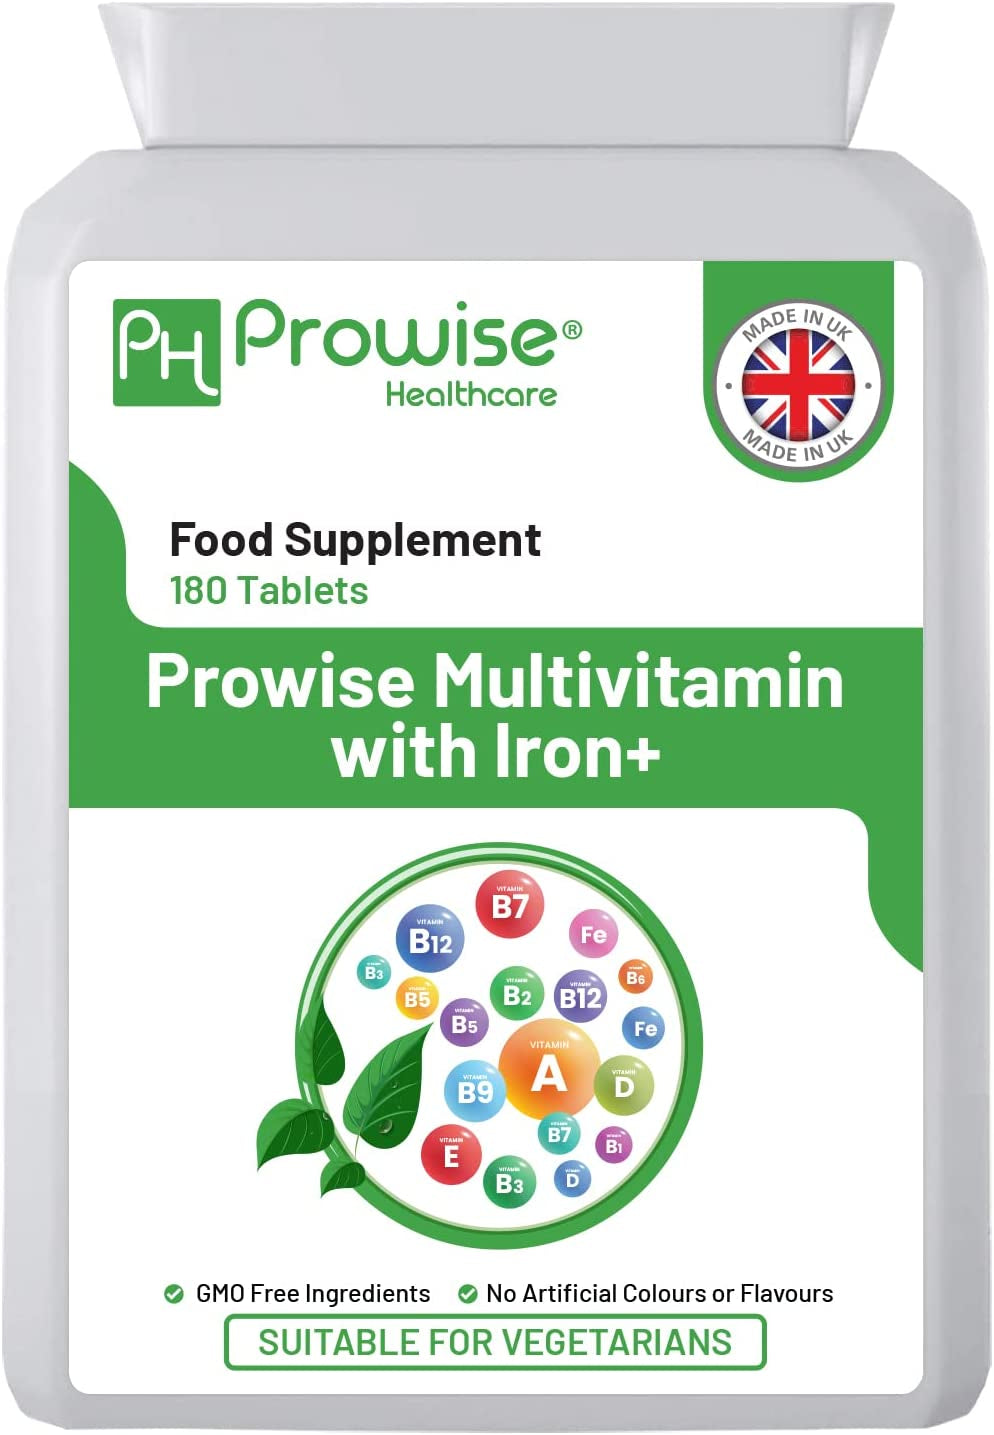 Multivitamin & Iron 180 Tablets (6 Months Dose) Immune Support - One a Day Multi-Vitamin Supplement – UK Manufactured | GMP Standards by Prowise Healthcare - Suitable for Vegetarians